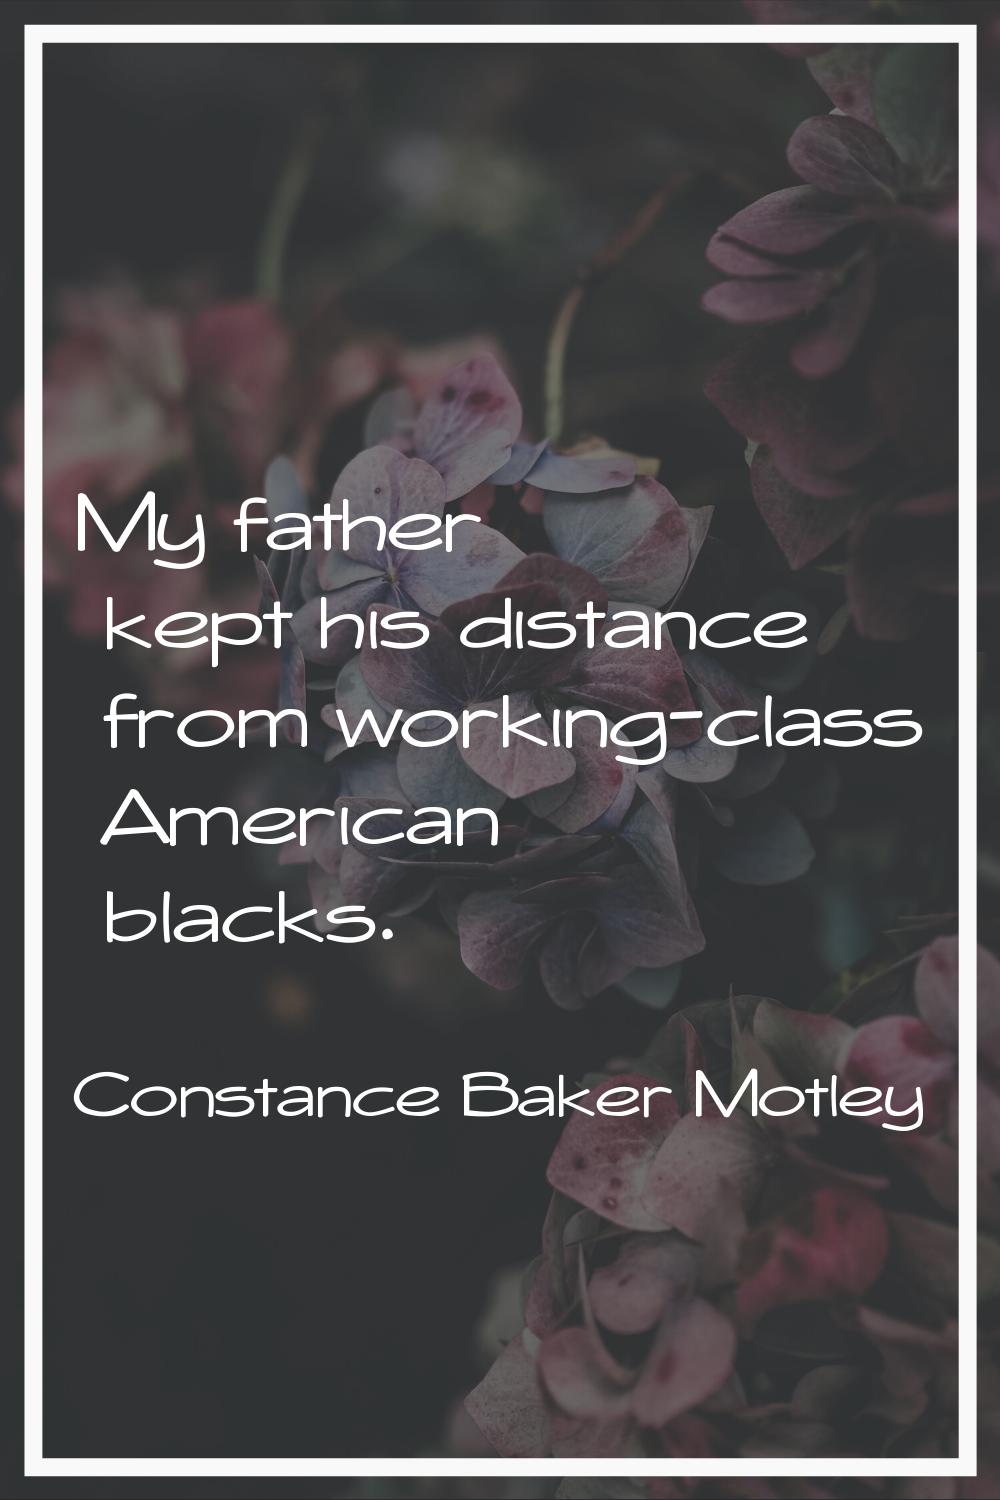 My father kept his distance from working-class American blacks.